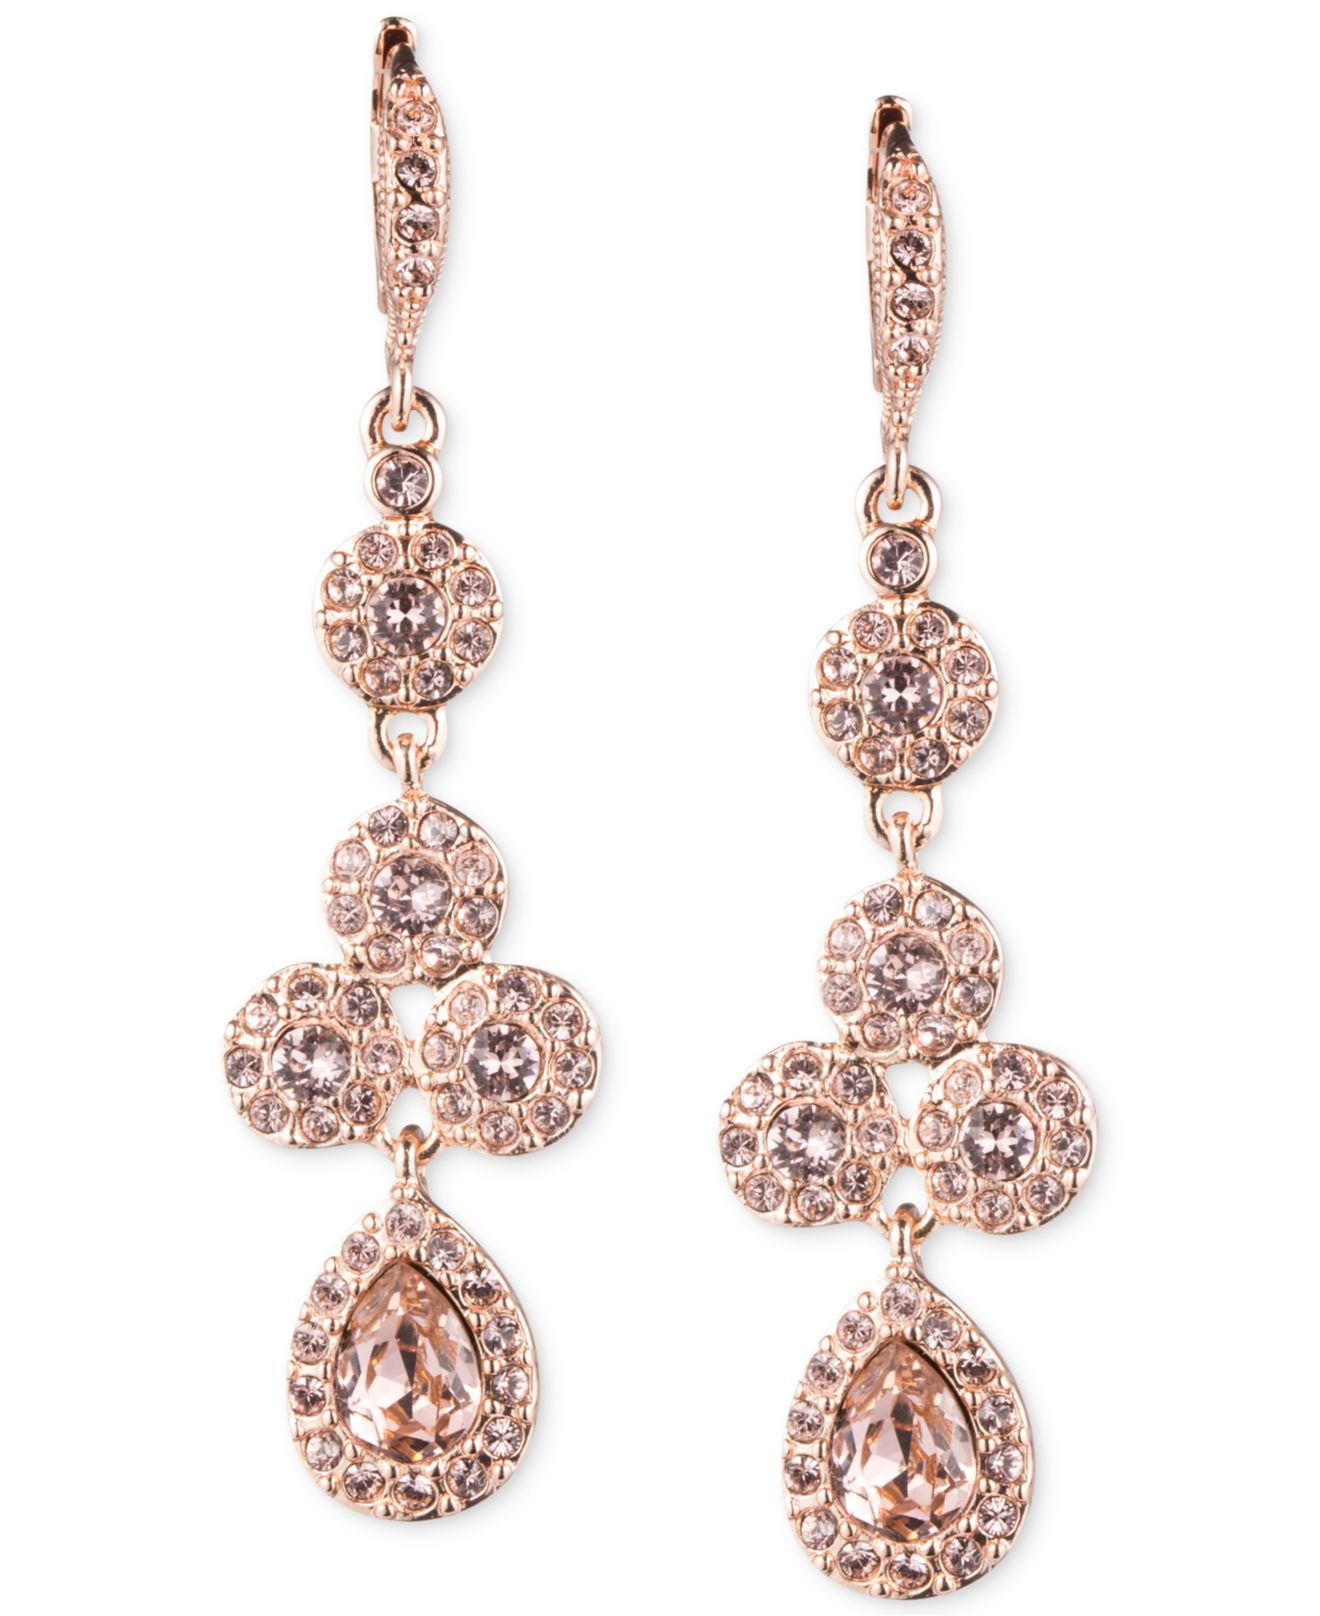 Givenchy Rose Gold-tone Swarovski Element Linear Drop Earrings in Pink